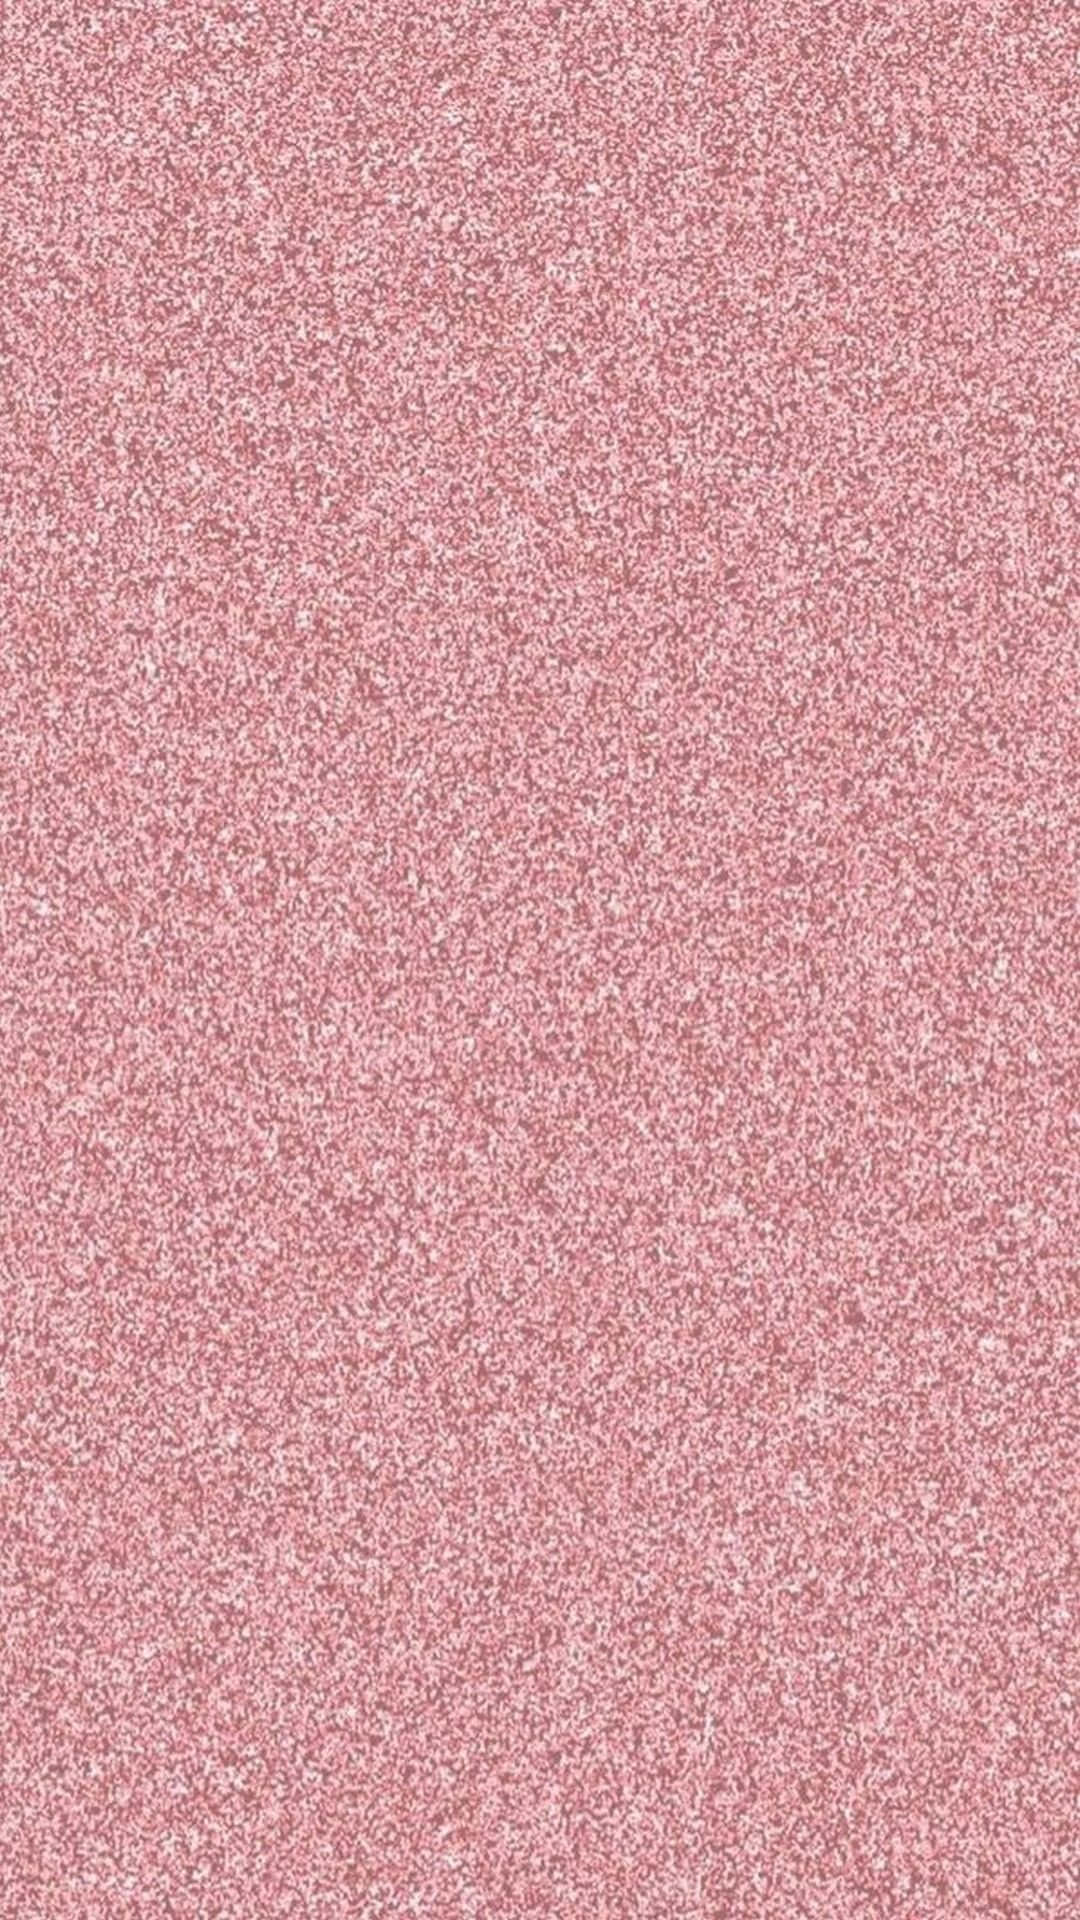 A Pink Glittery Background With Small White Dots